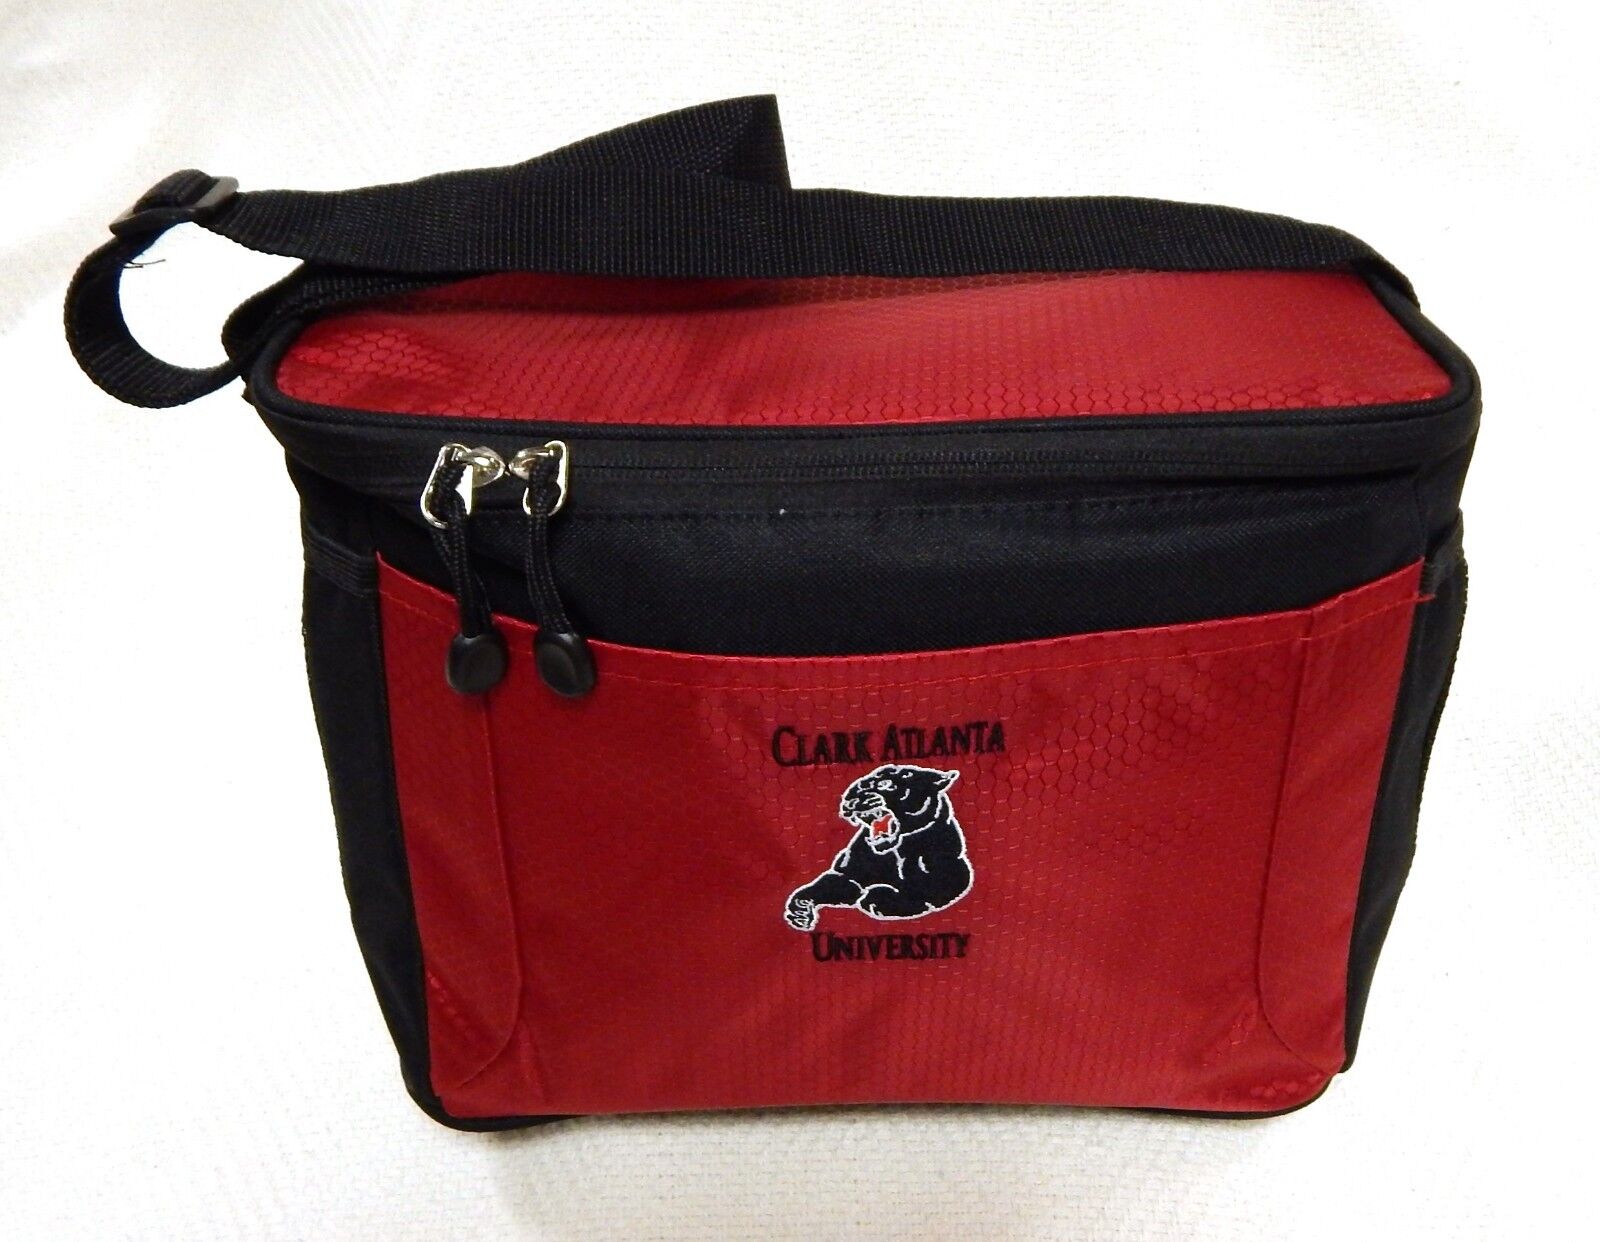 CLARK ATLANTA UNIVERSITY Cooler (12 can) Bag / Lunch/Picnic - Embroidered - HBCU